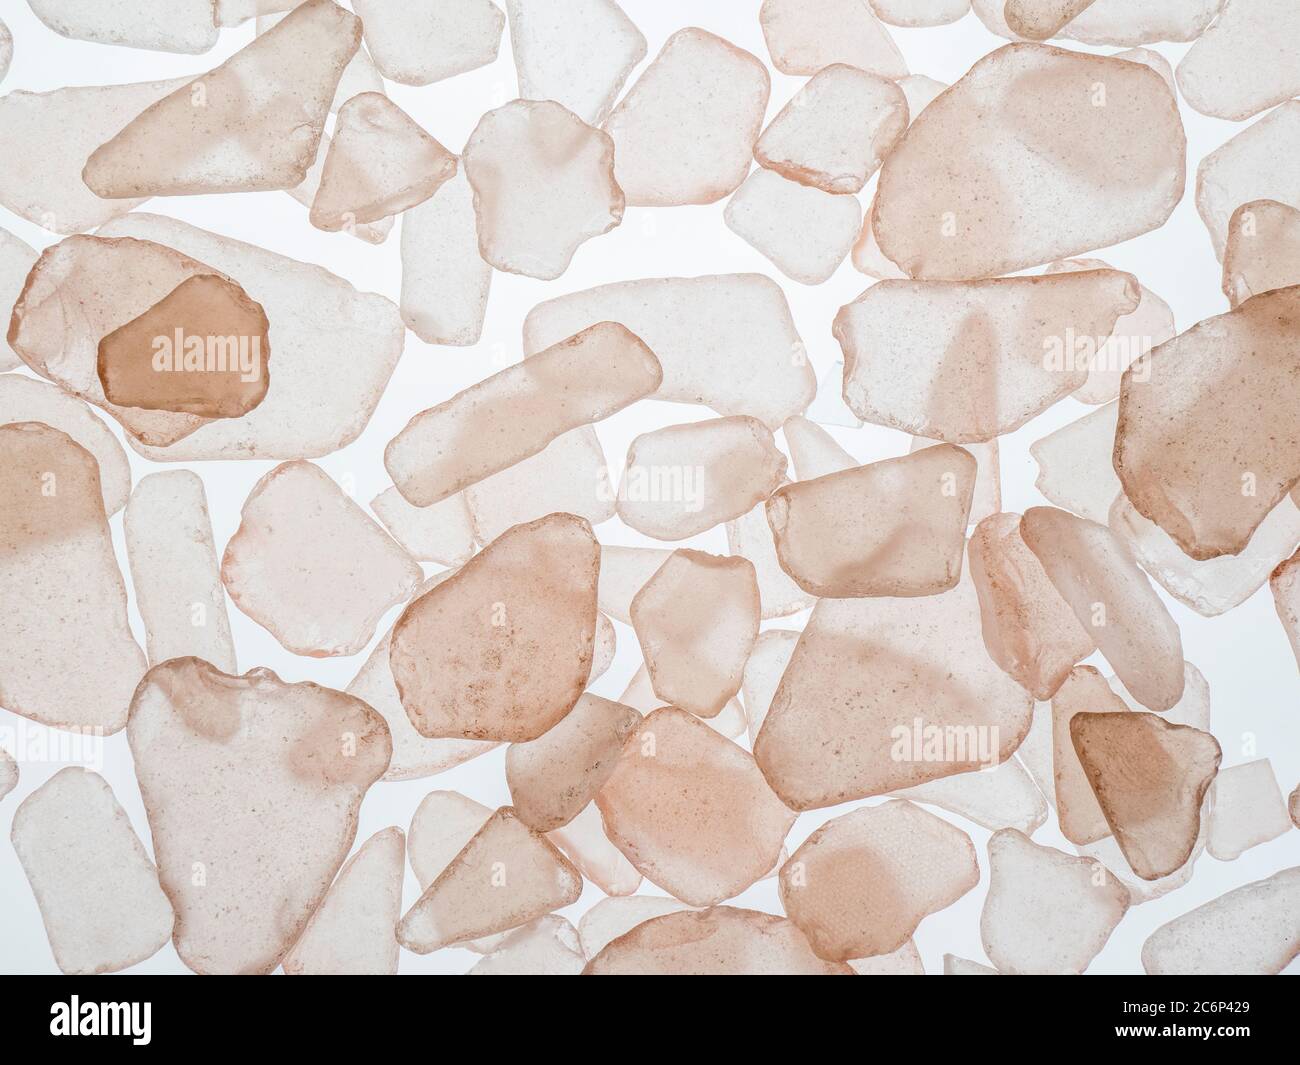 Close-up filling frame of translucent pink sea glass chips on a white background Stock Photo